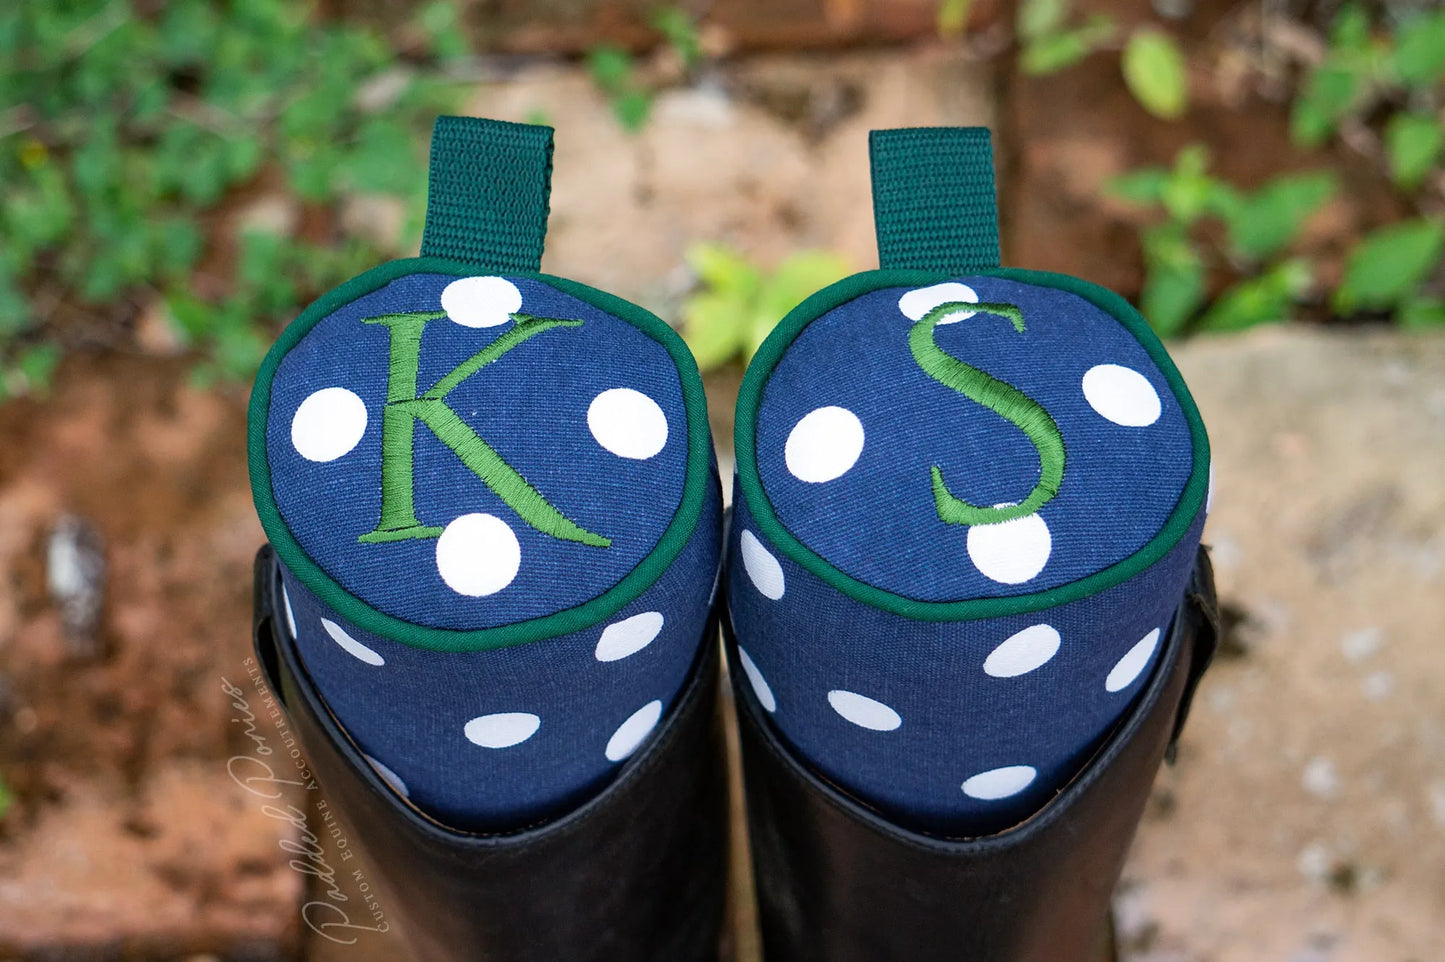 Navy Blue and Hunter Green Polka Dot Boot Trees with Monogram